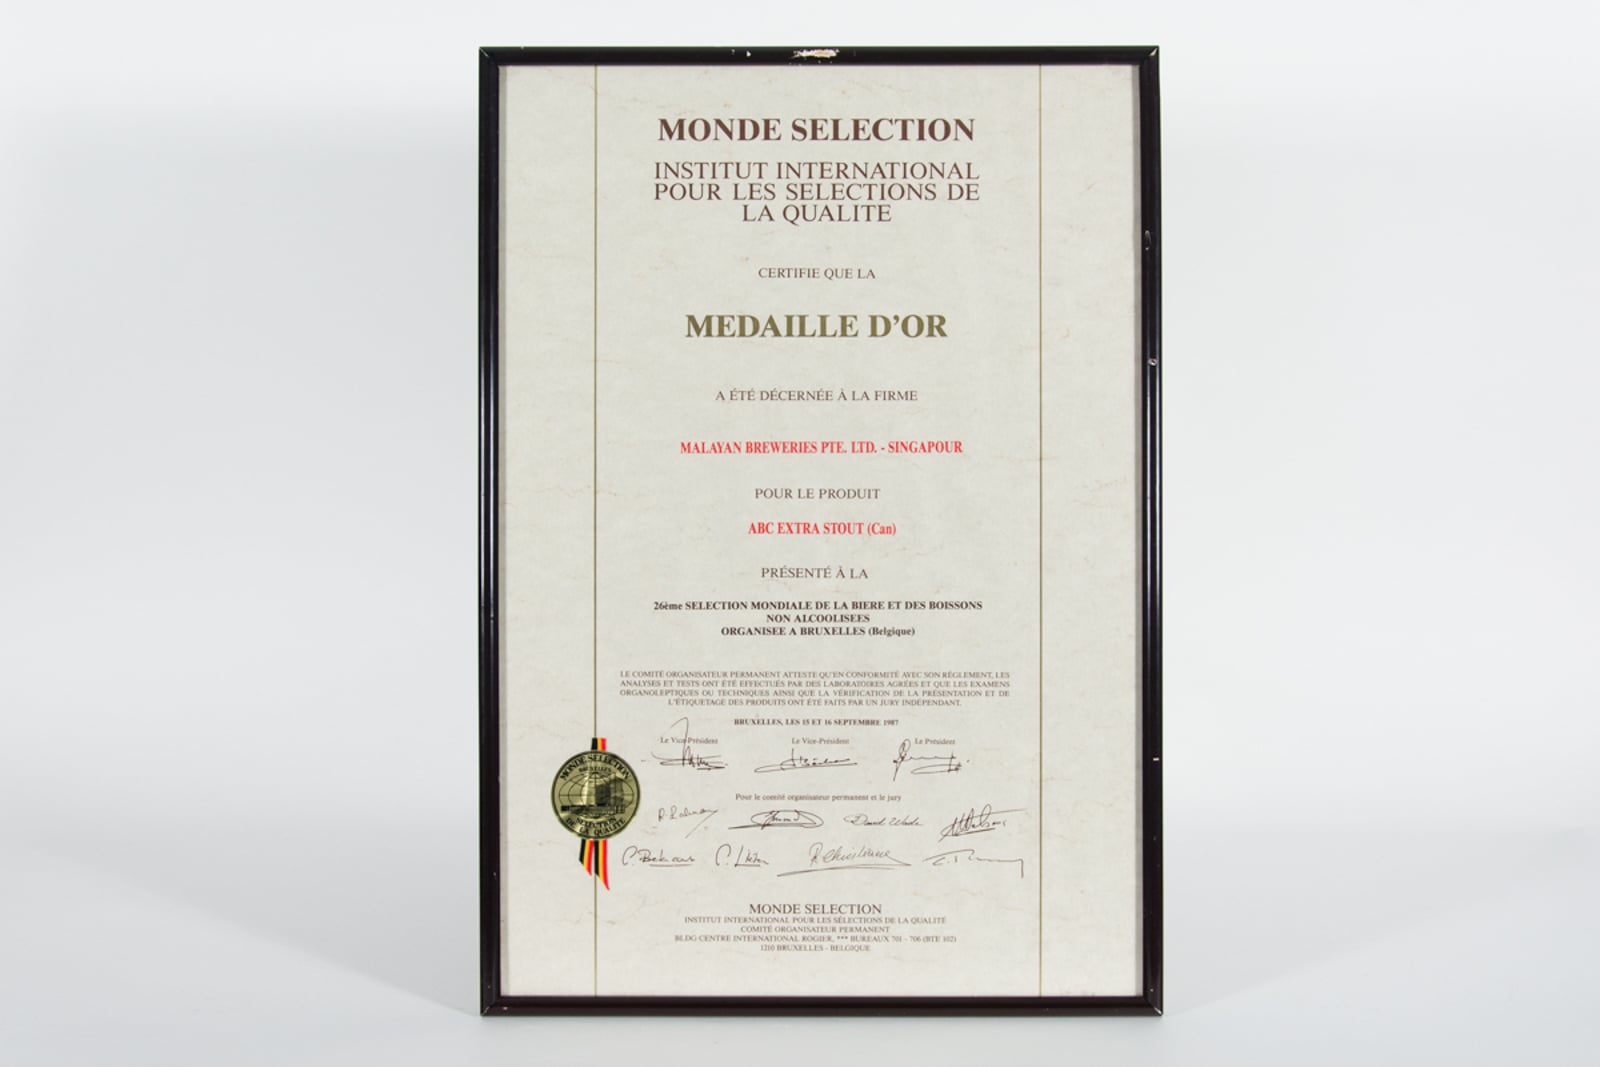 ABC Extra Stout (Can) Médaille d'Or, Monde Selection Certificate 1987